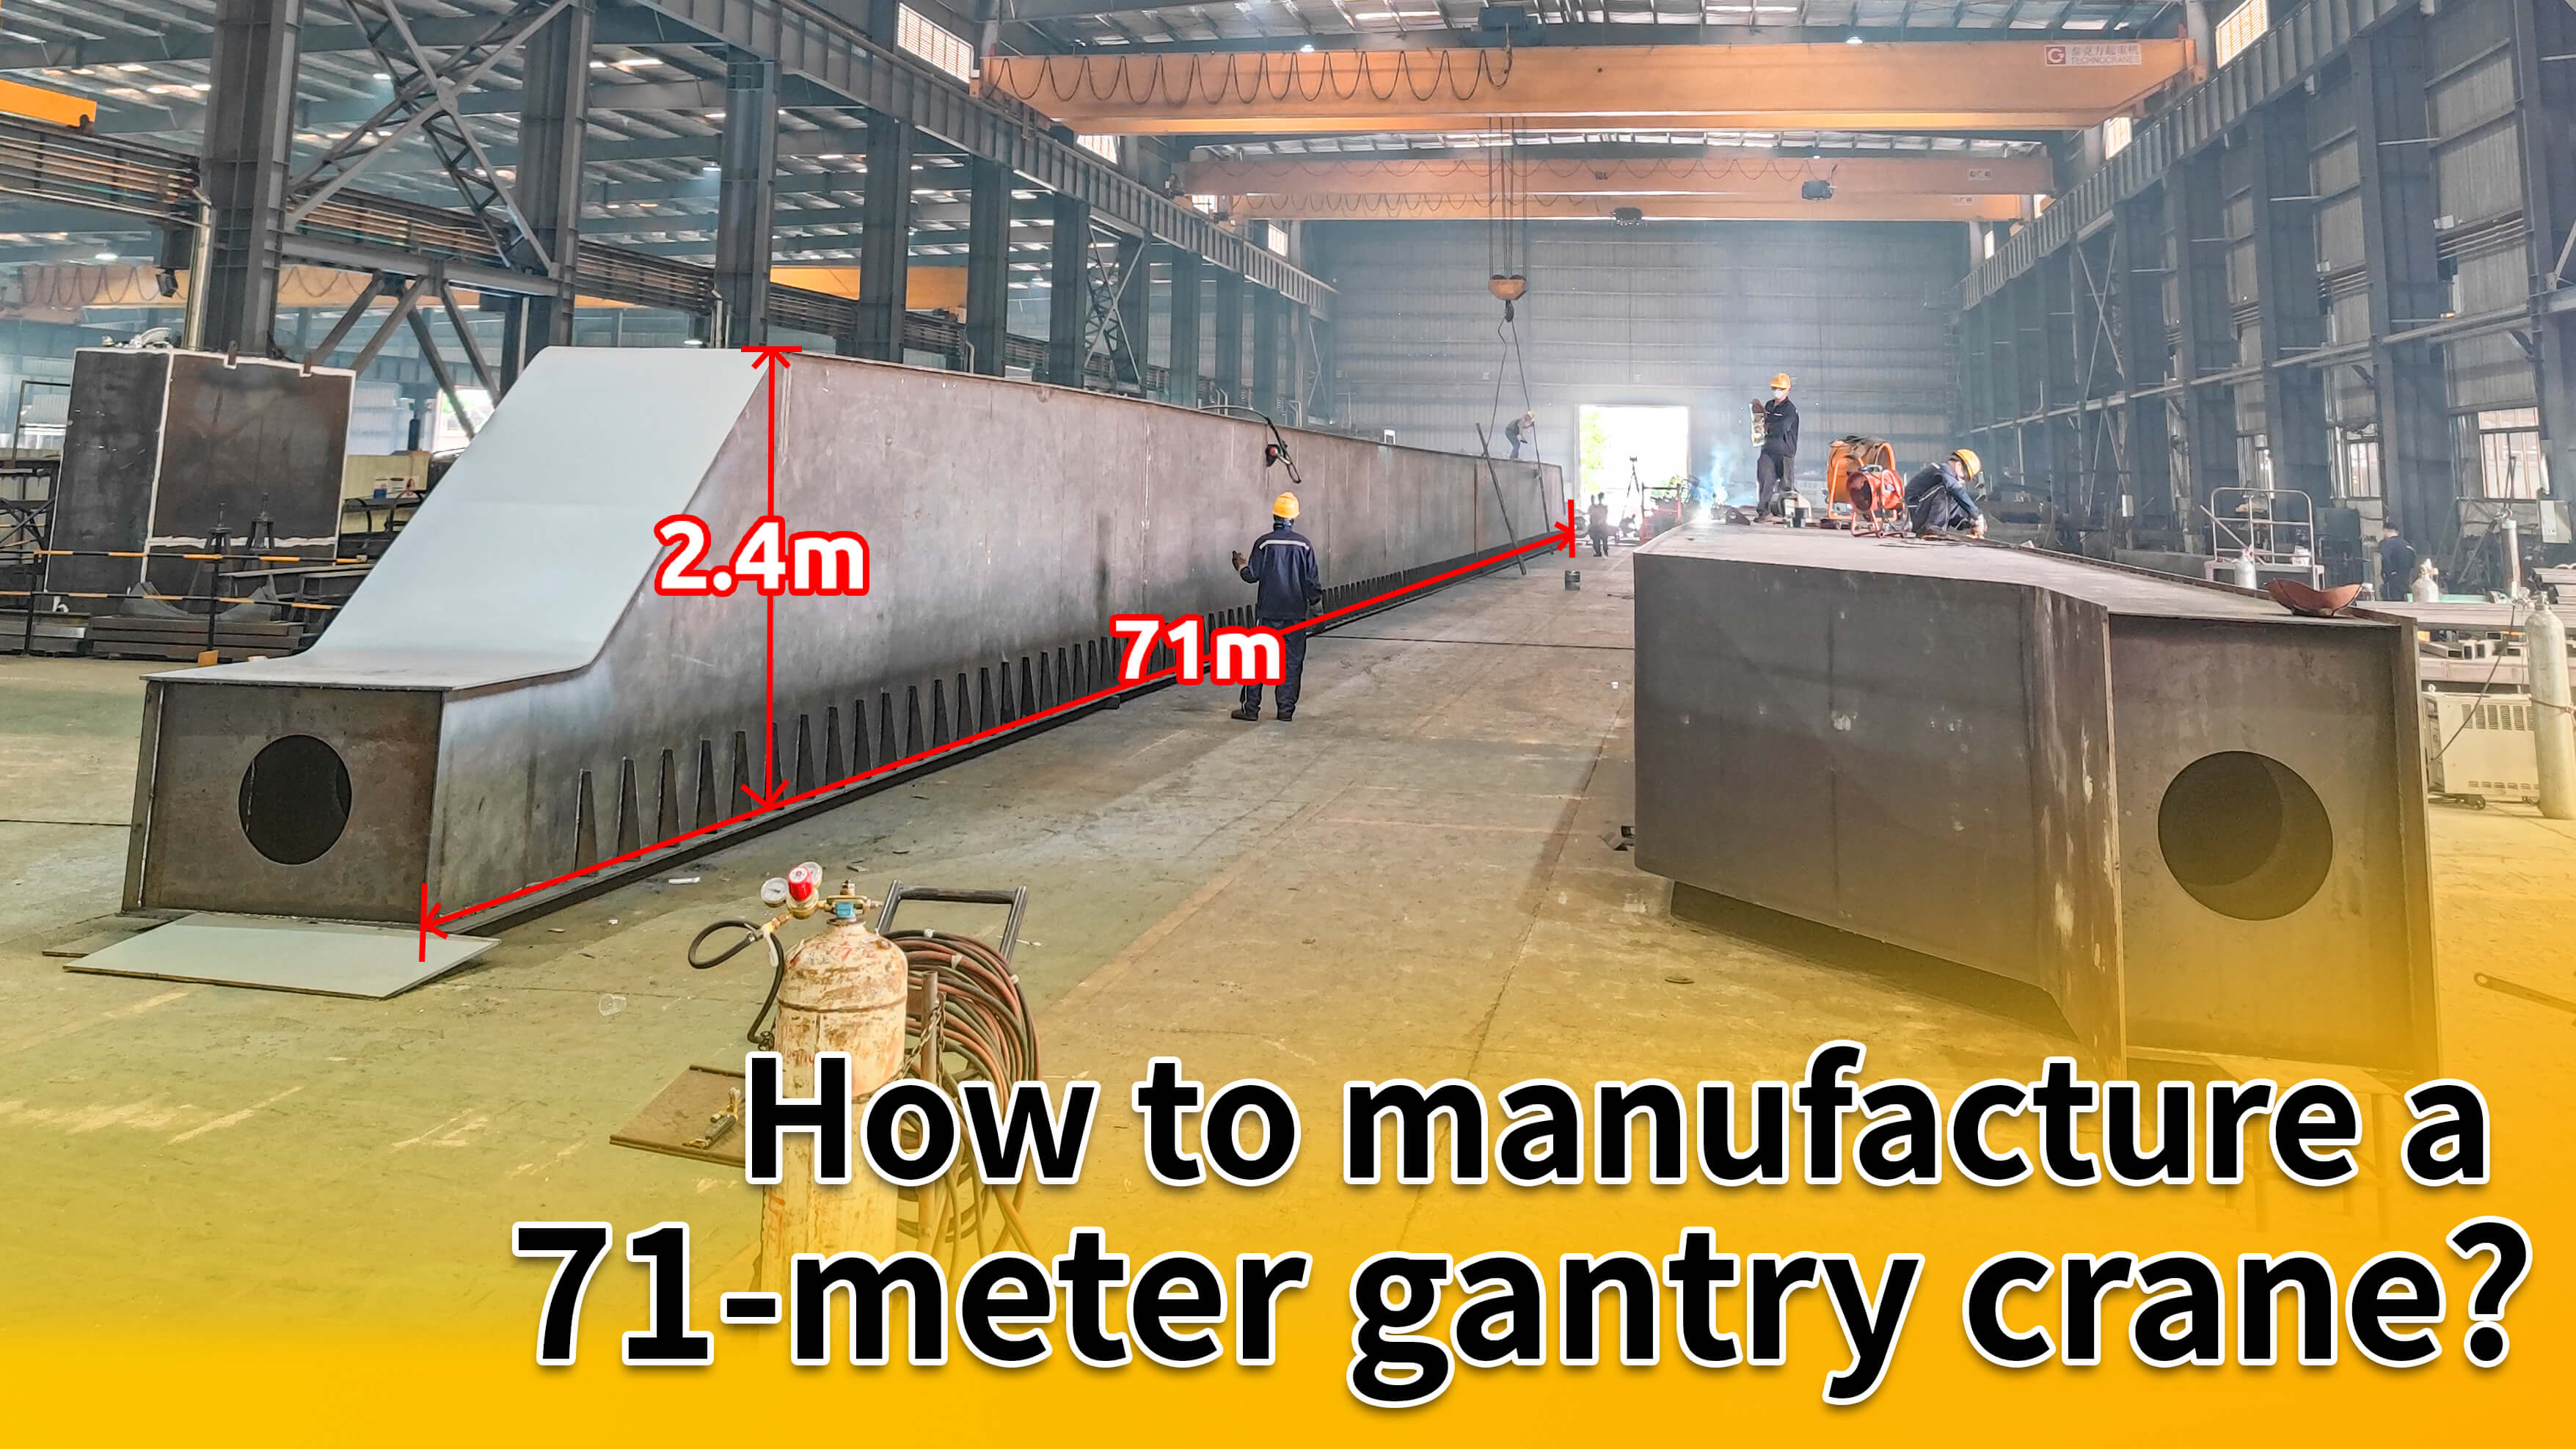 How to manufacture a 71-meter gantry crane?